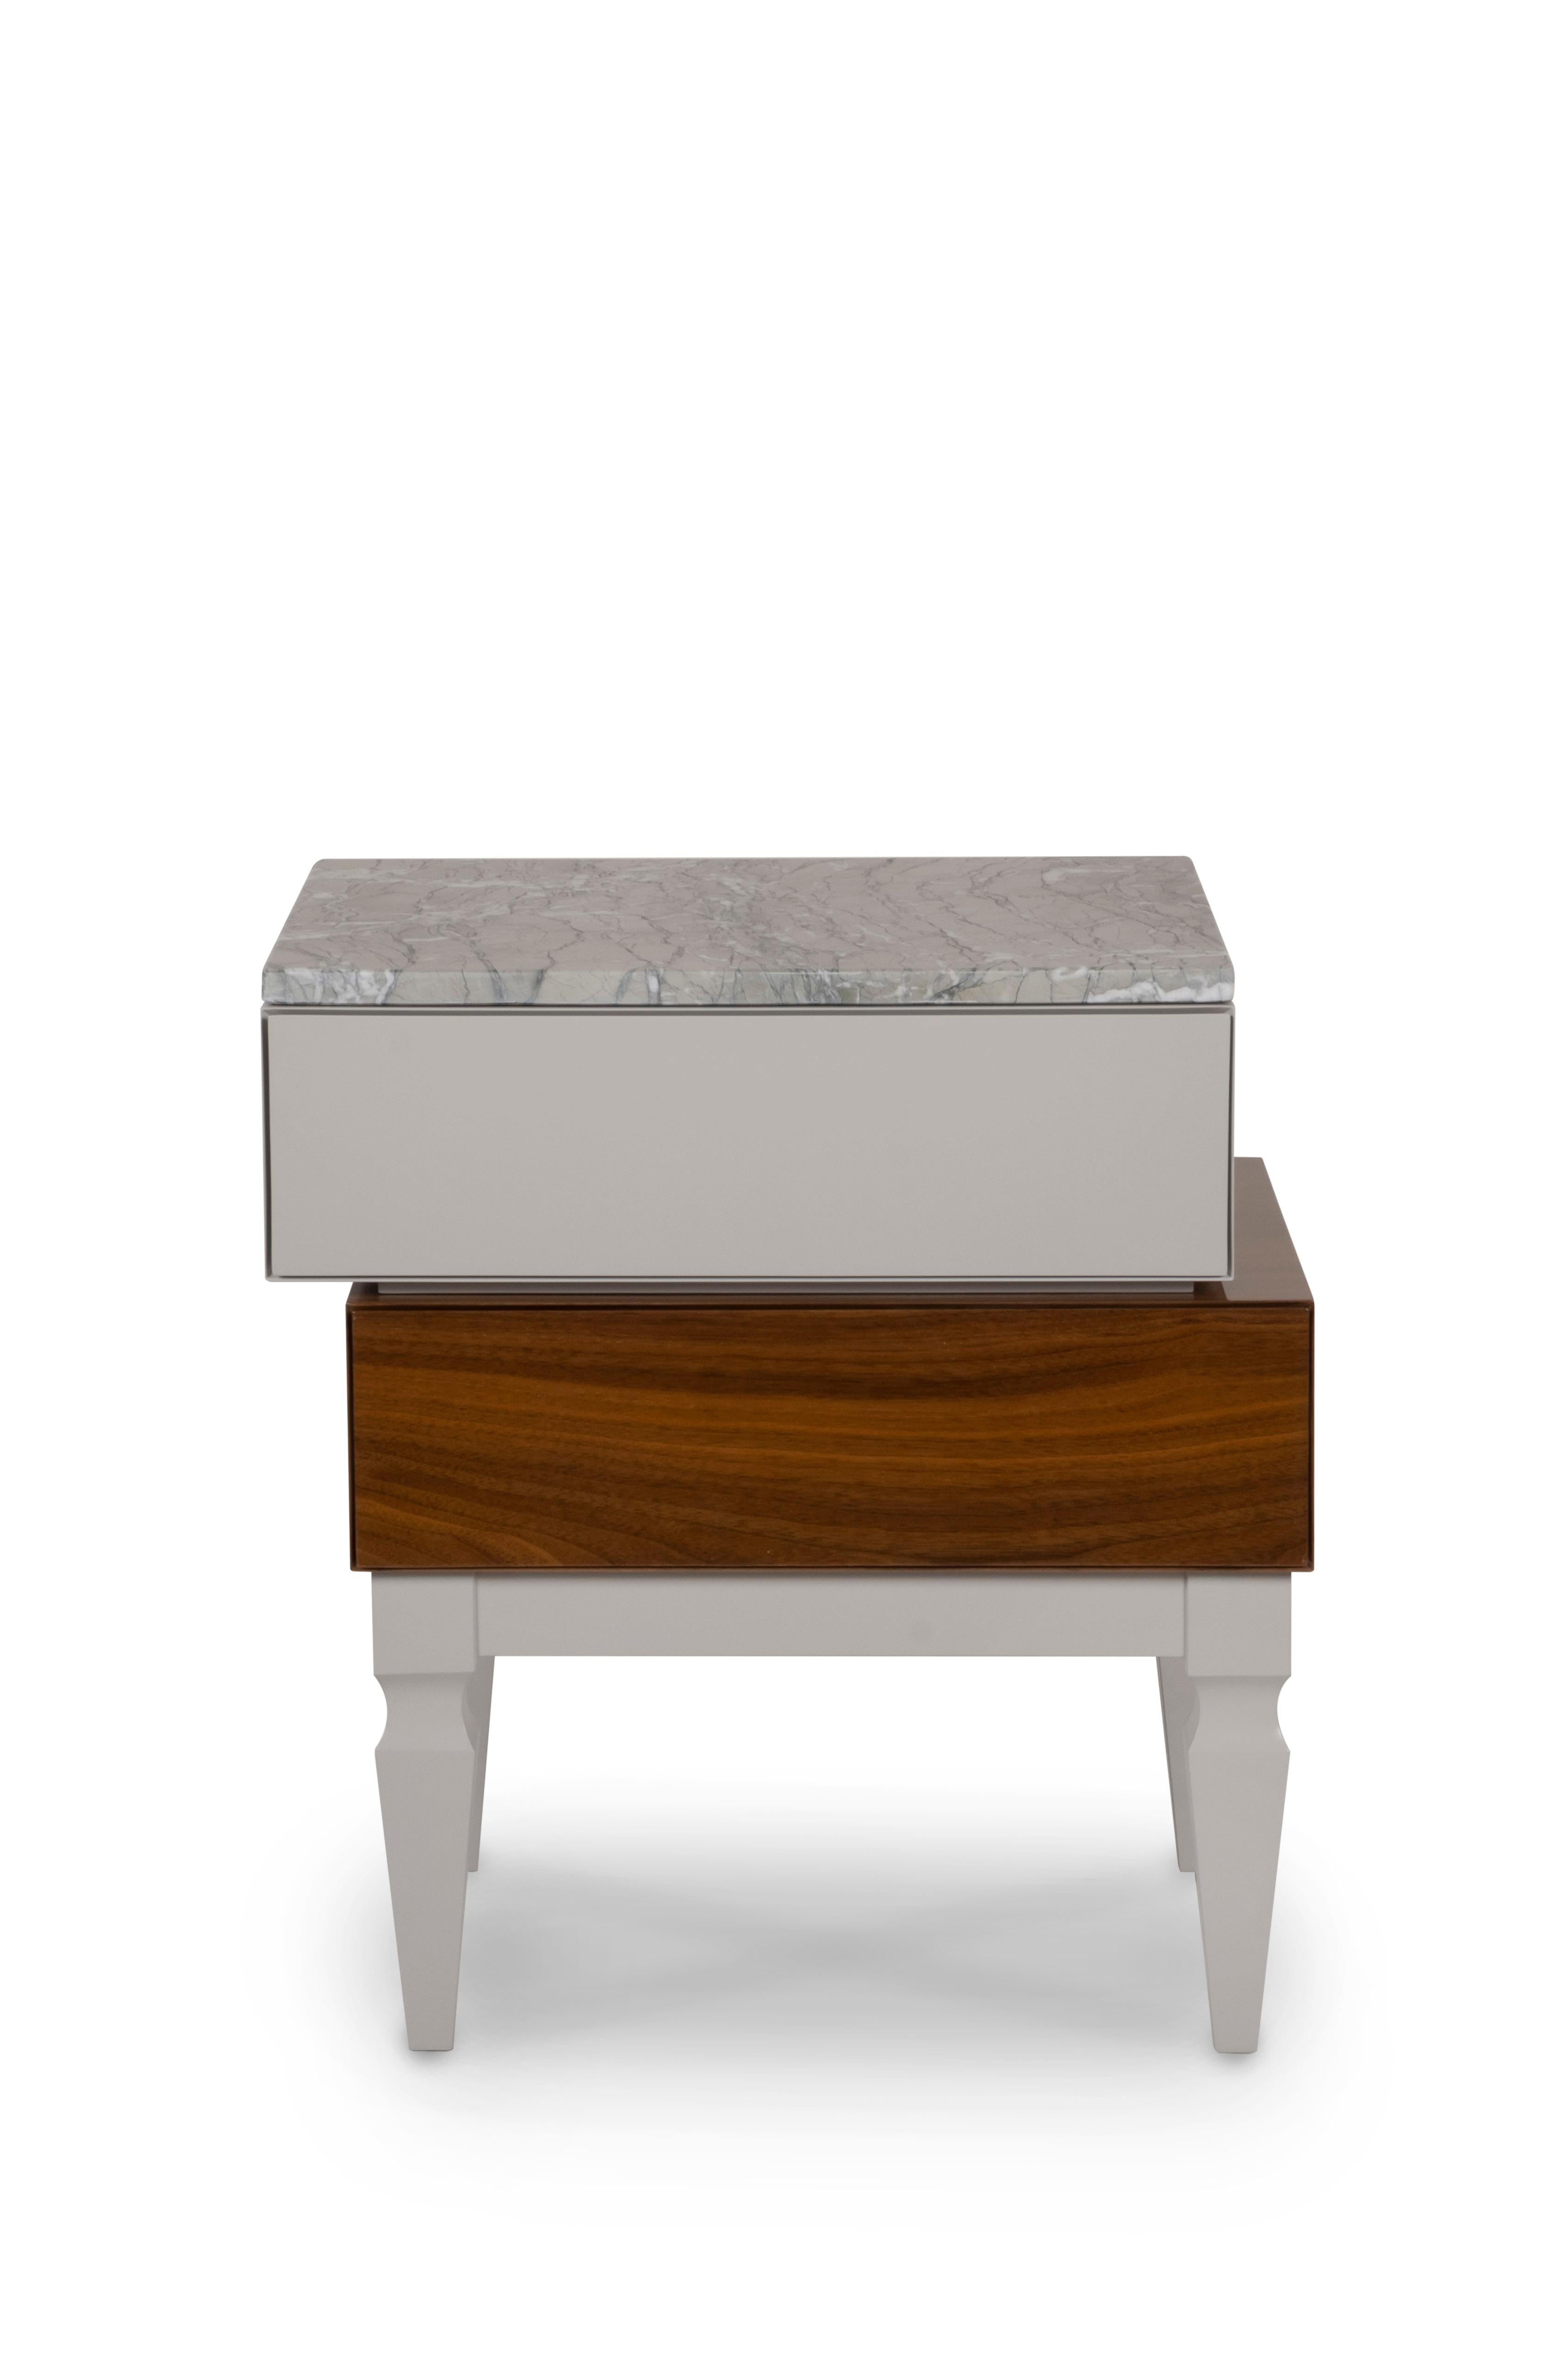 Block bedside table, Modern Collection, handcrafted in Portugal - Europe by GF Modern.

The Block bedside table offers a misaligned and unique design for your comfort space. The walnut compartment and the Verde Antigua marble top enhance the